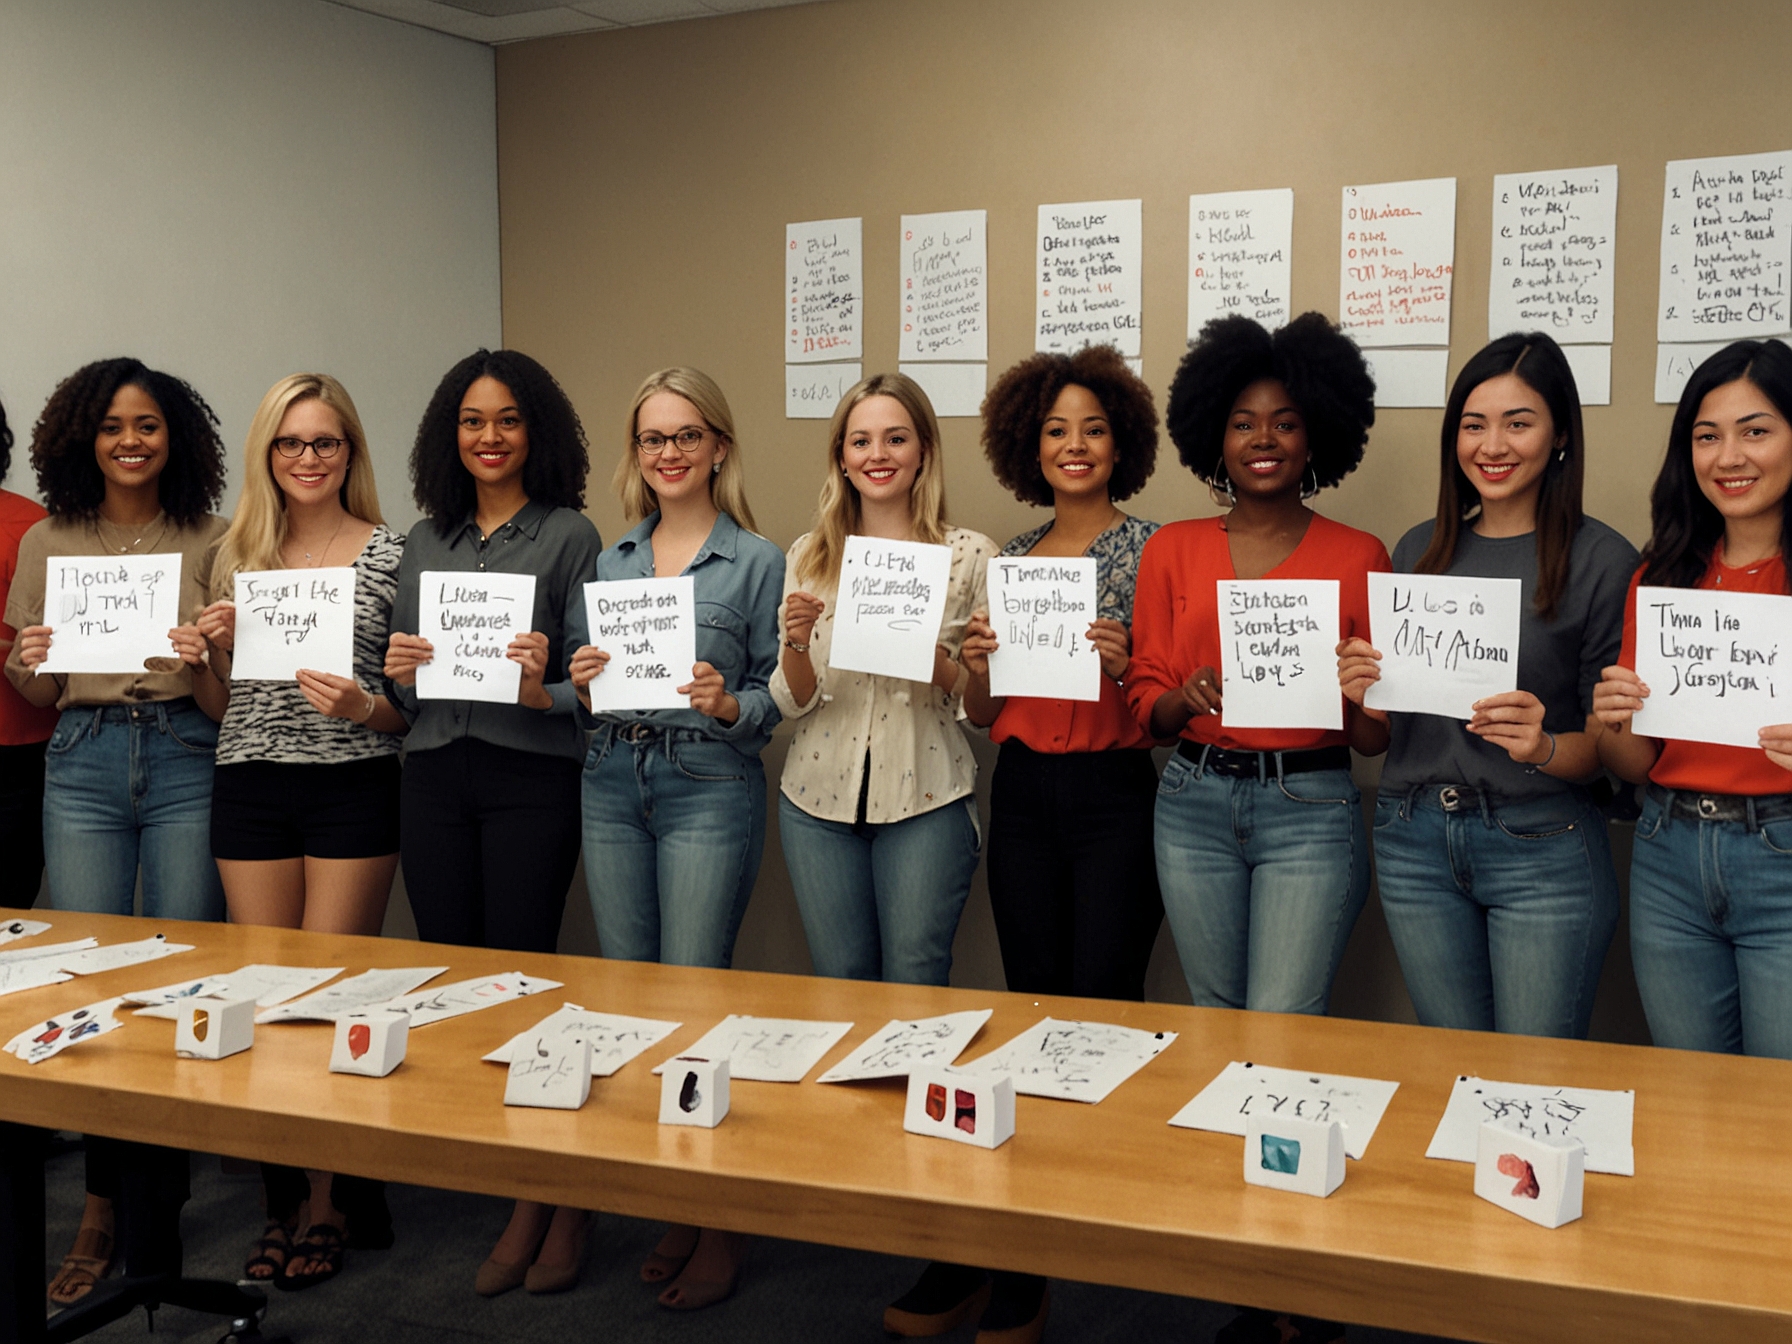 Women participating in a 'Label Liberation' workshop hosted by TJ Maxx. They write down labels they have been assigned on cards, later replacing them with empowering affirmations, visually representing the dismantling of societal constraints.